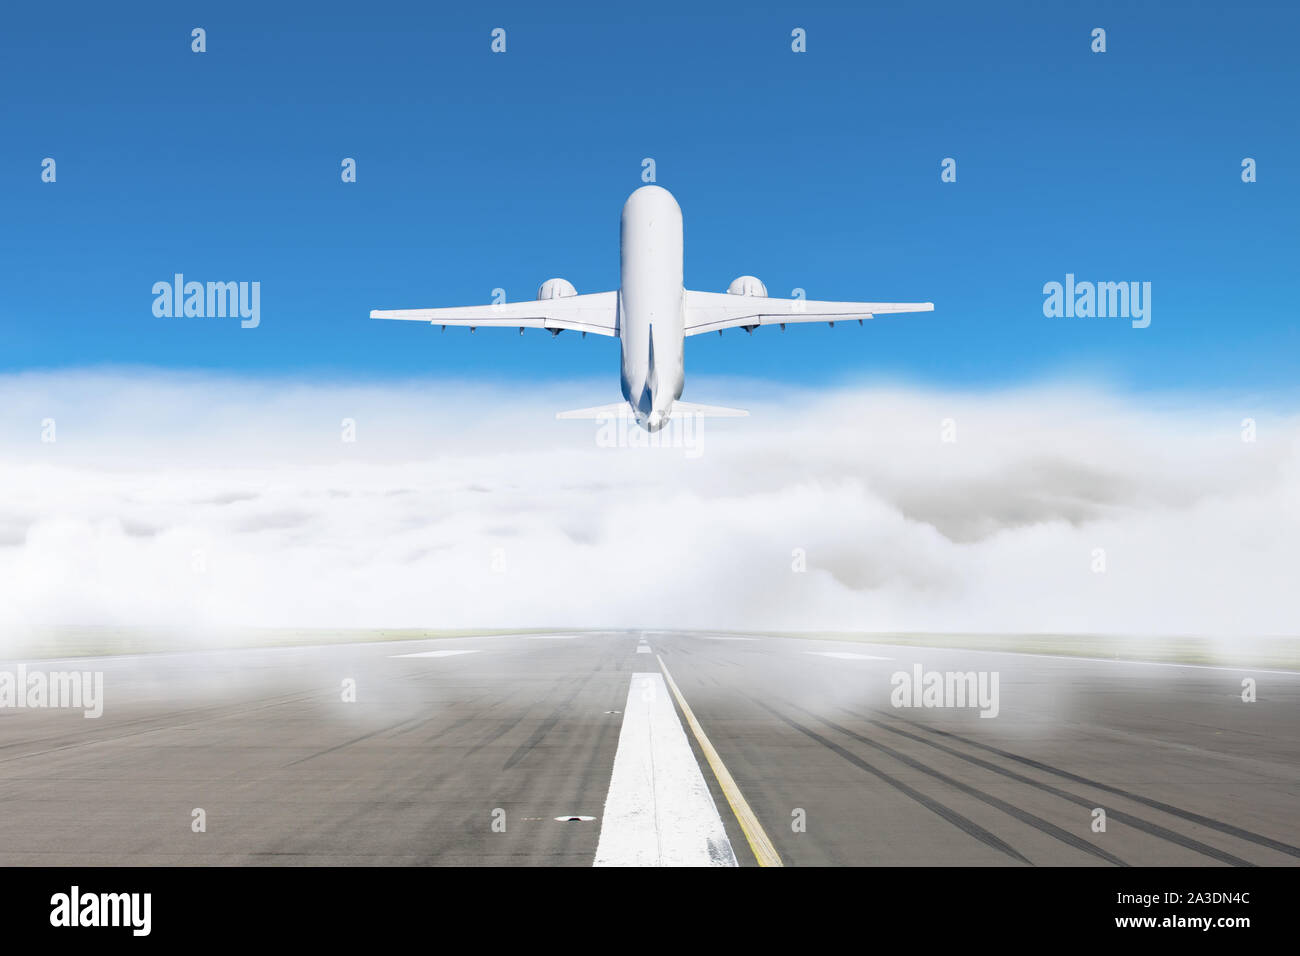 Take-off passenger plane from a cloud of fog at the airport, concept of delayed flights in bad weather Stock Photo